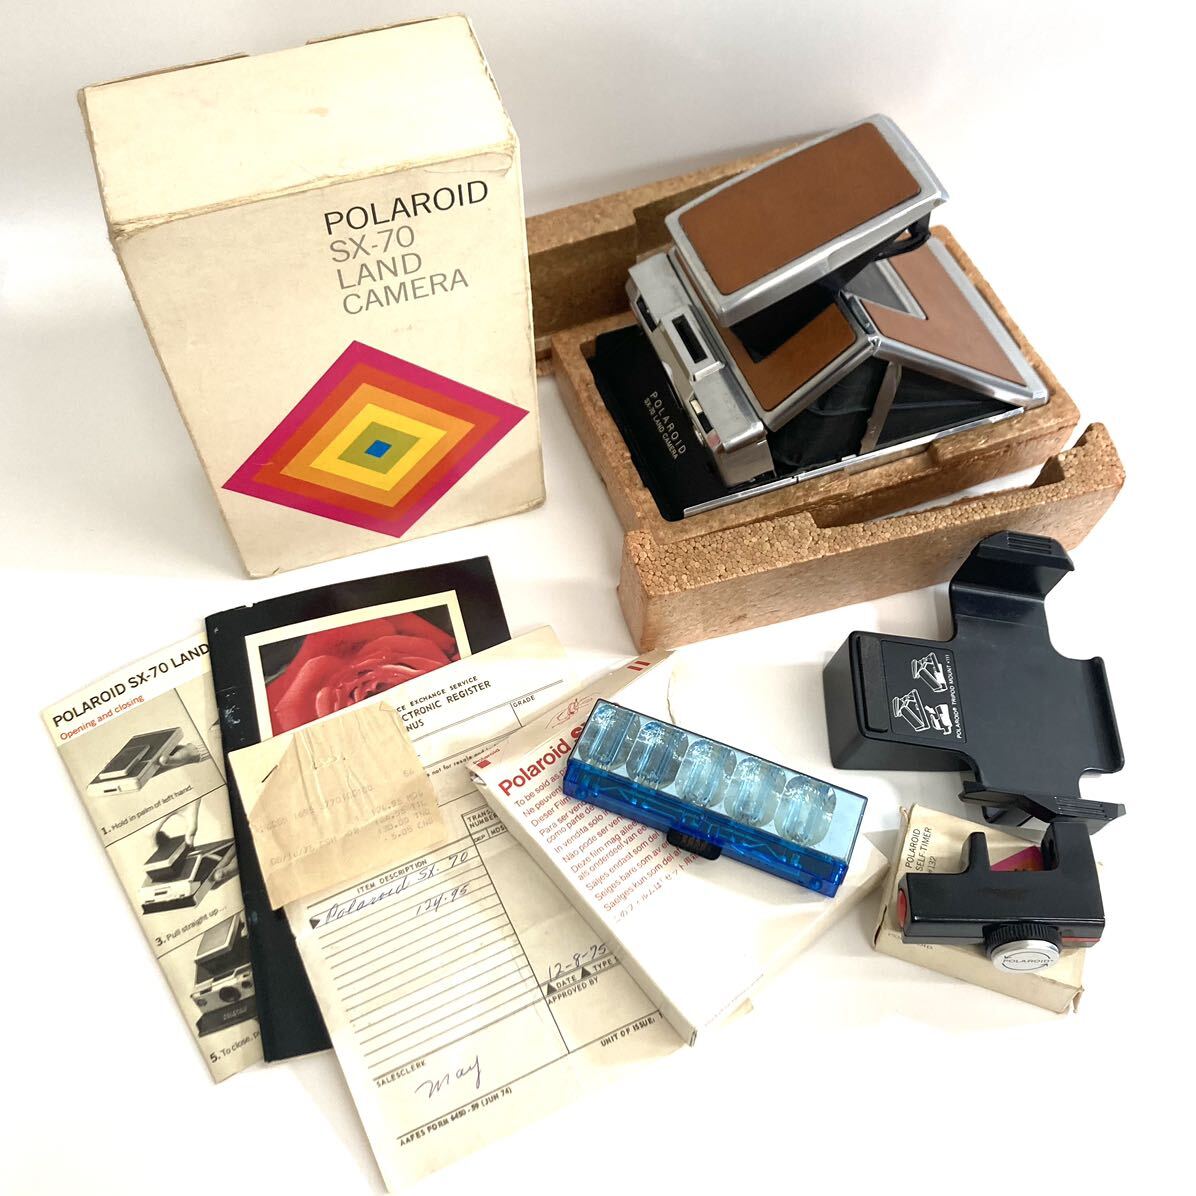 SH* 1 jpy start POLAROID SX-70 LAND CAMERA Polaroid camera used operation not yet verification Vintage rare box, manual, small articles, at that time. details document 